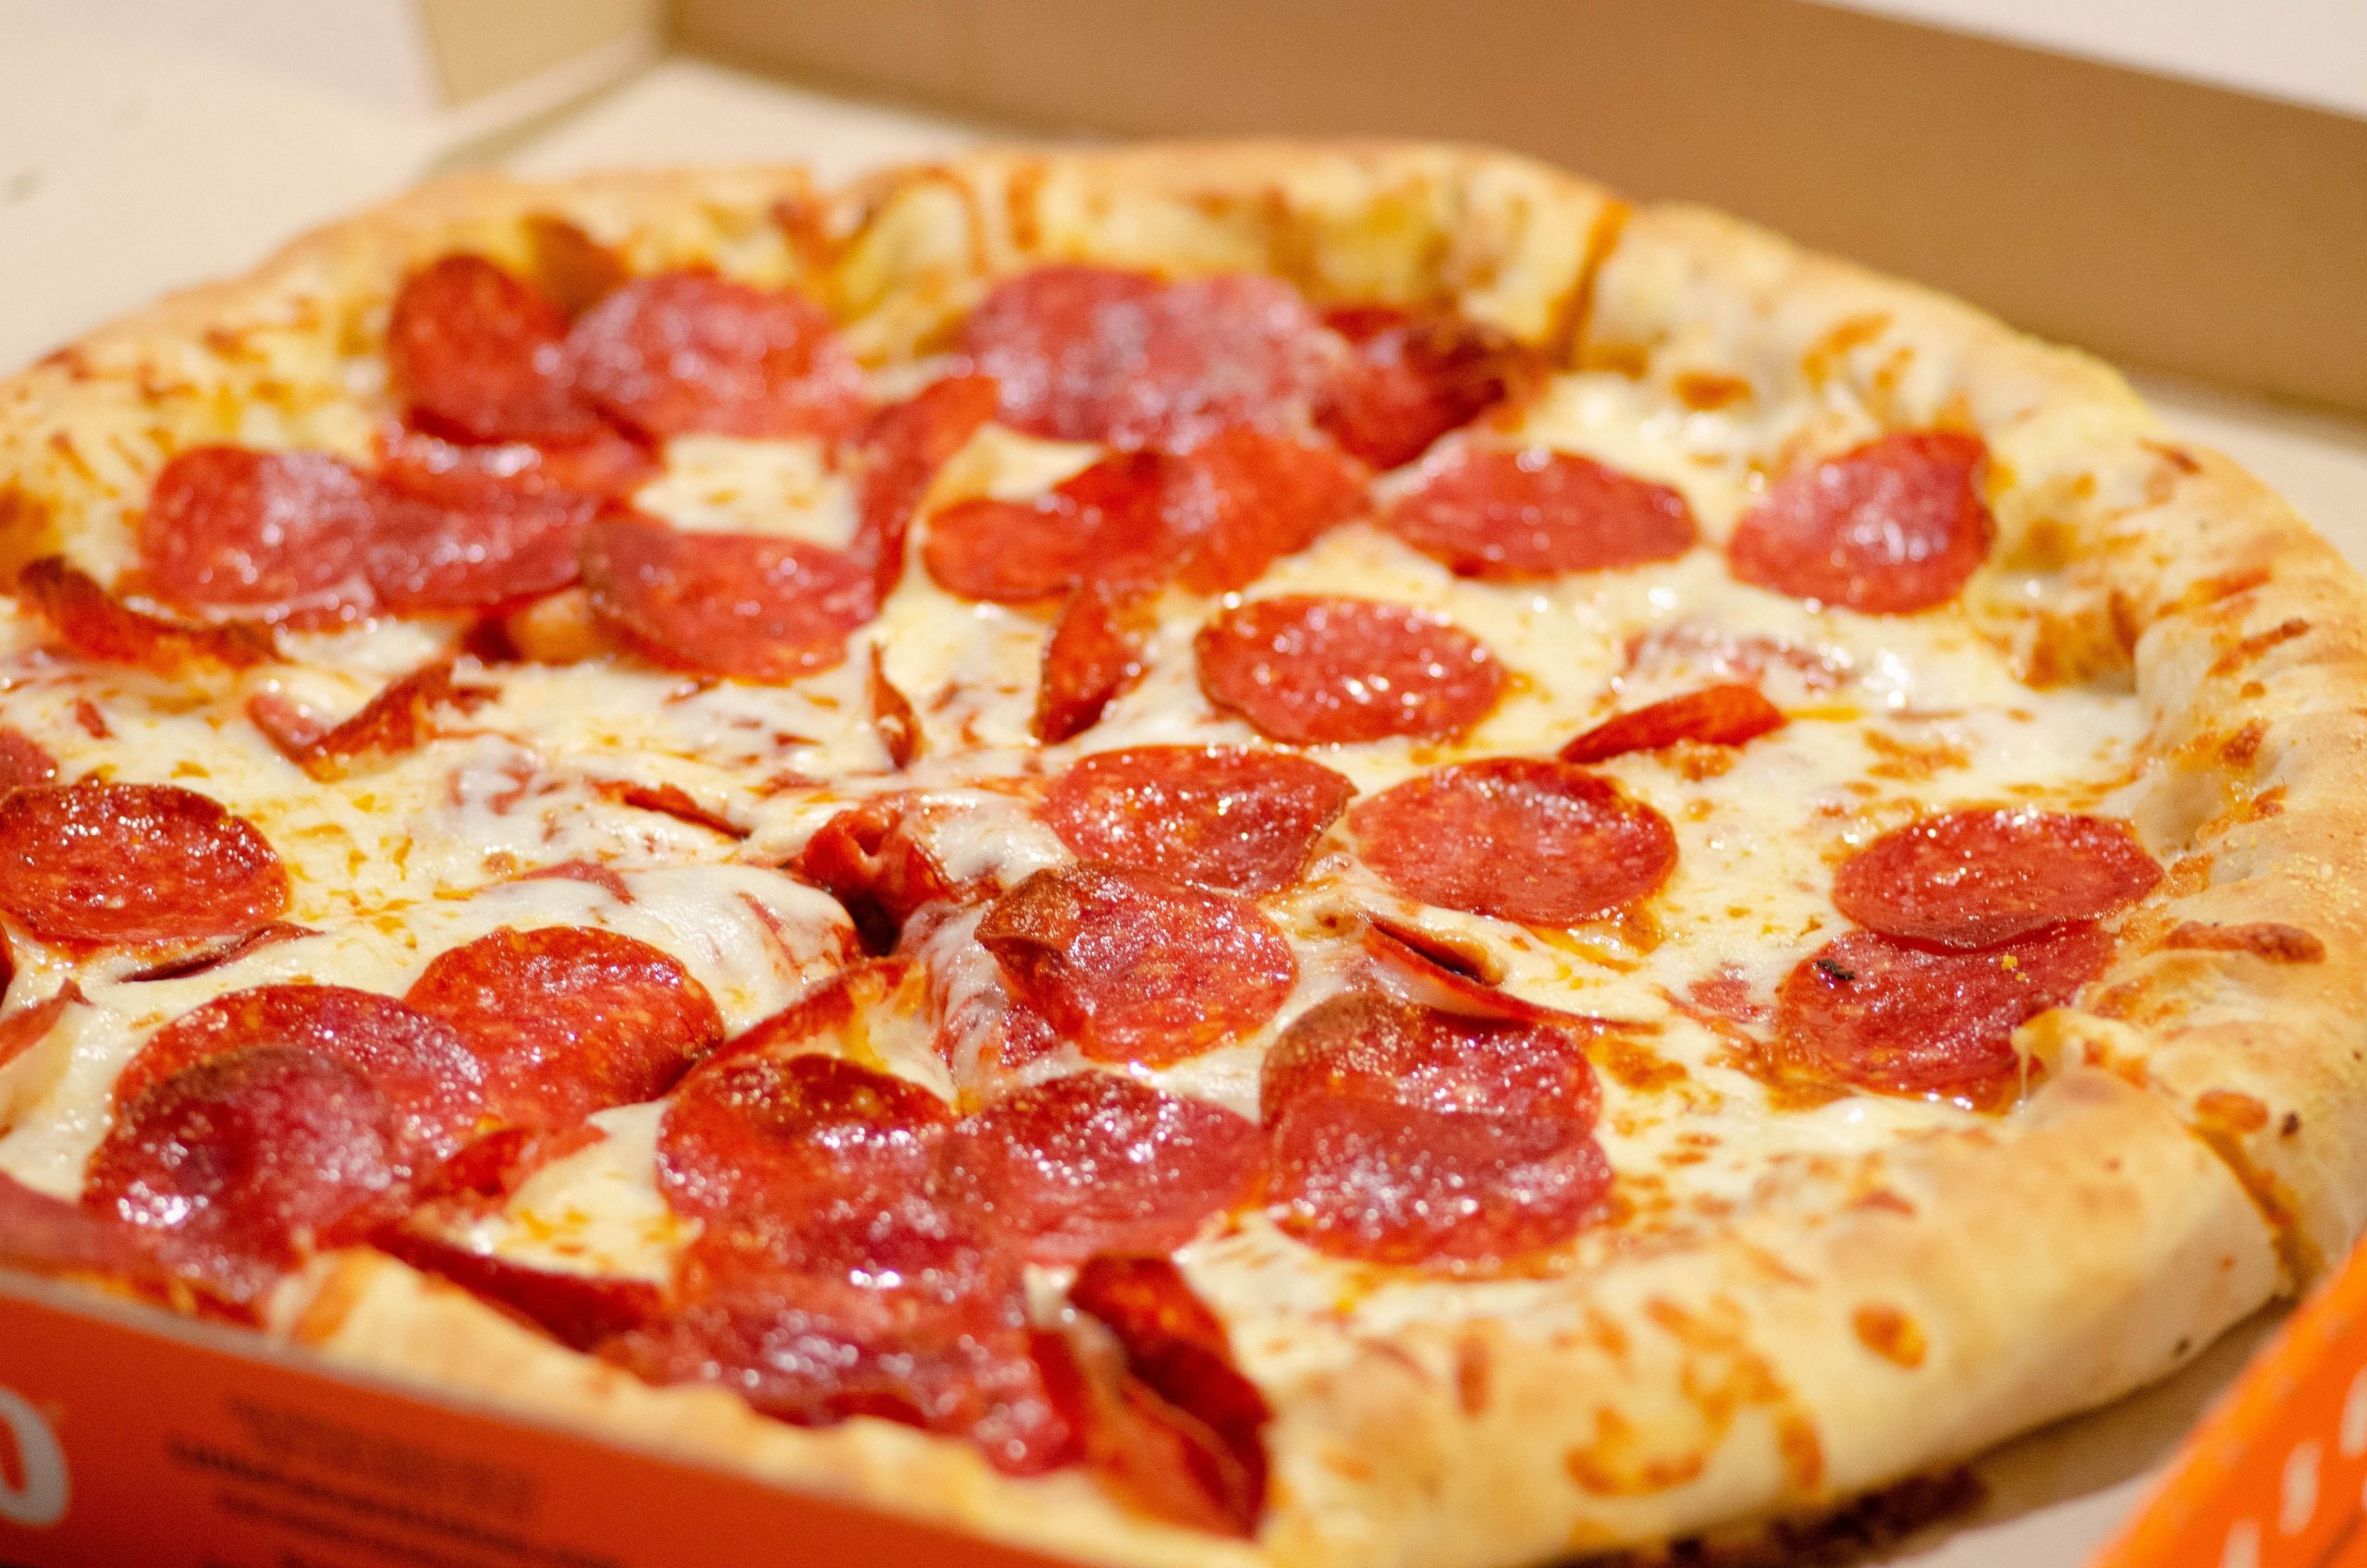 Discounts and coupons to grab on National Pepperoni Pizza Day